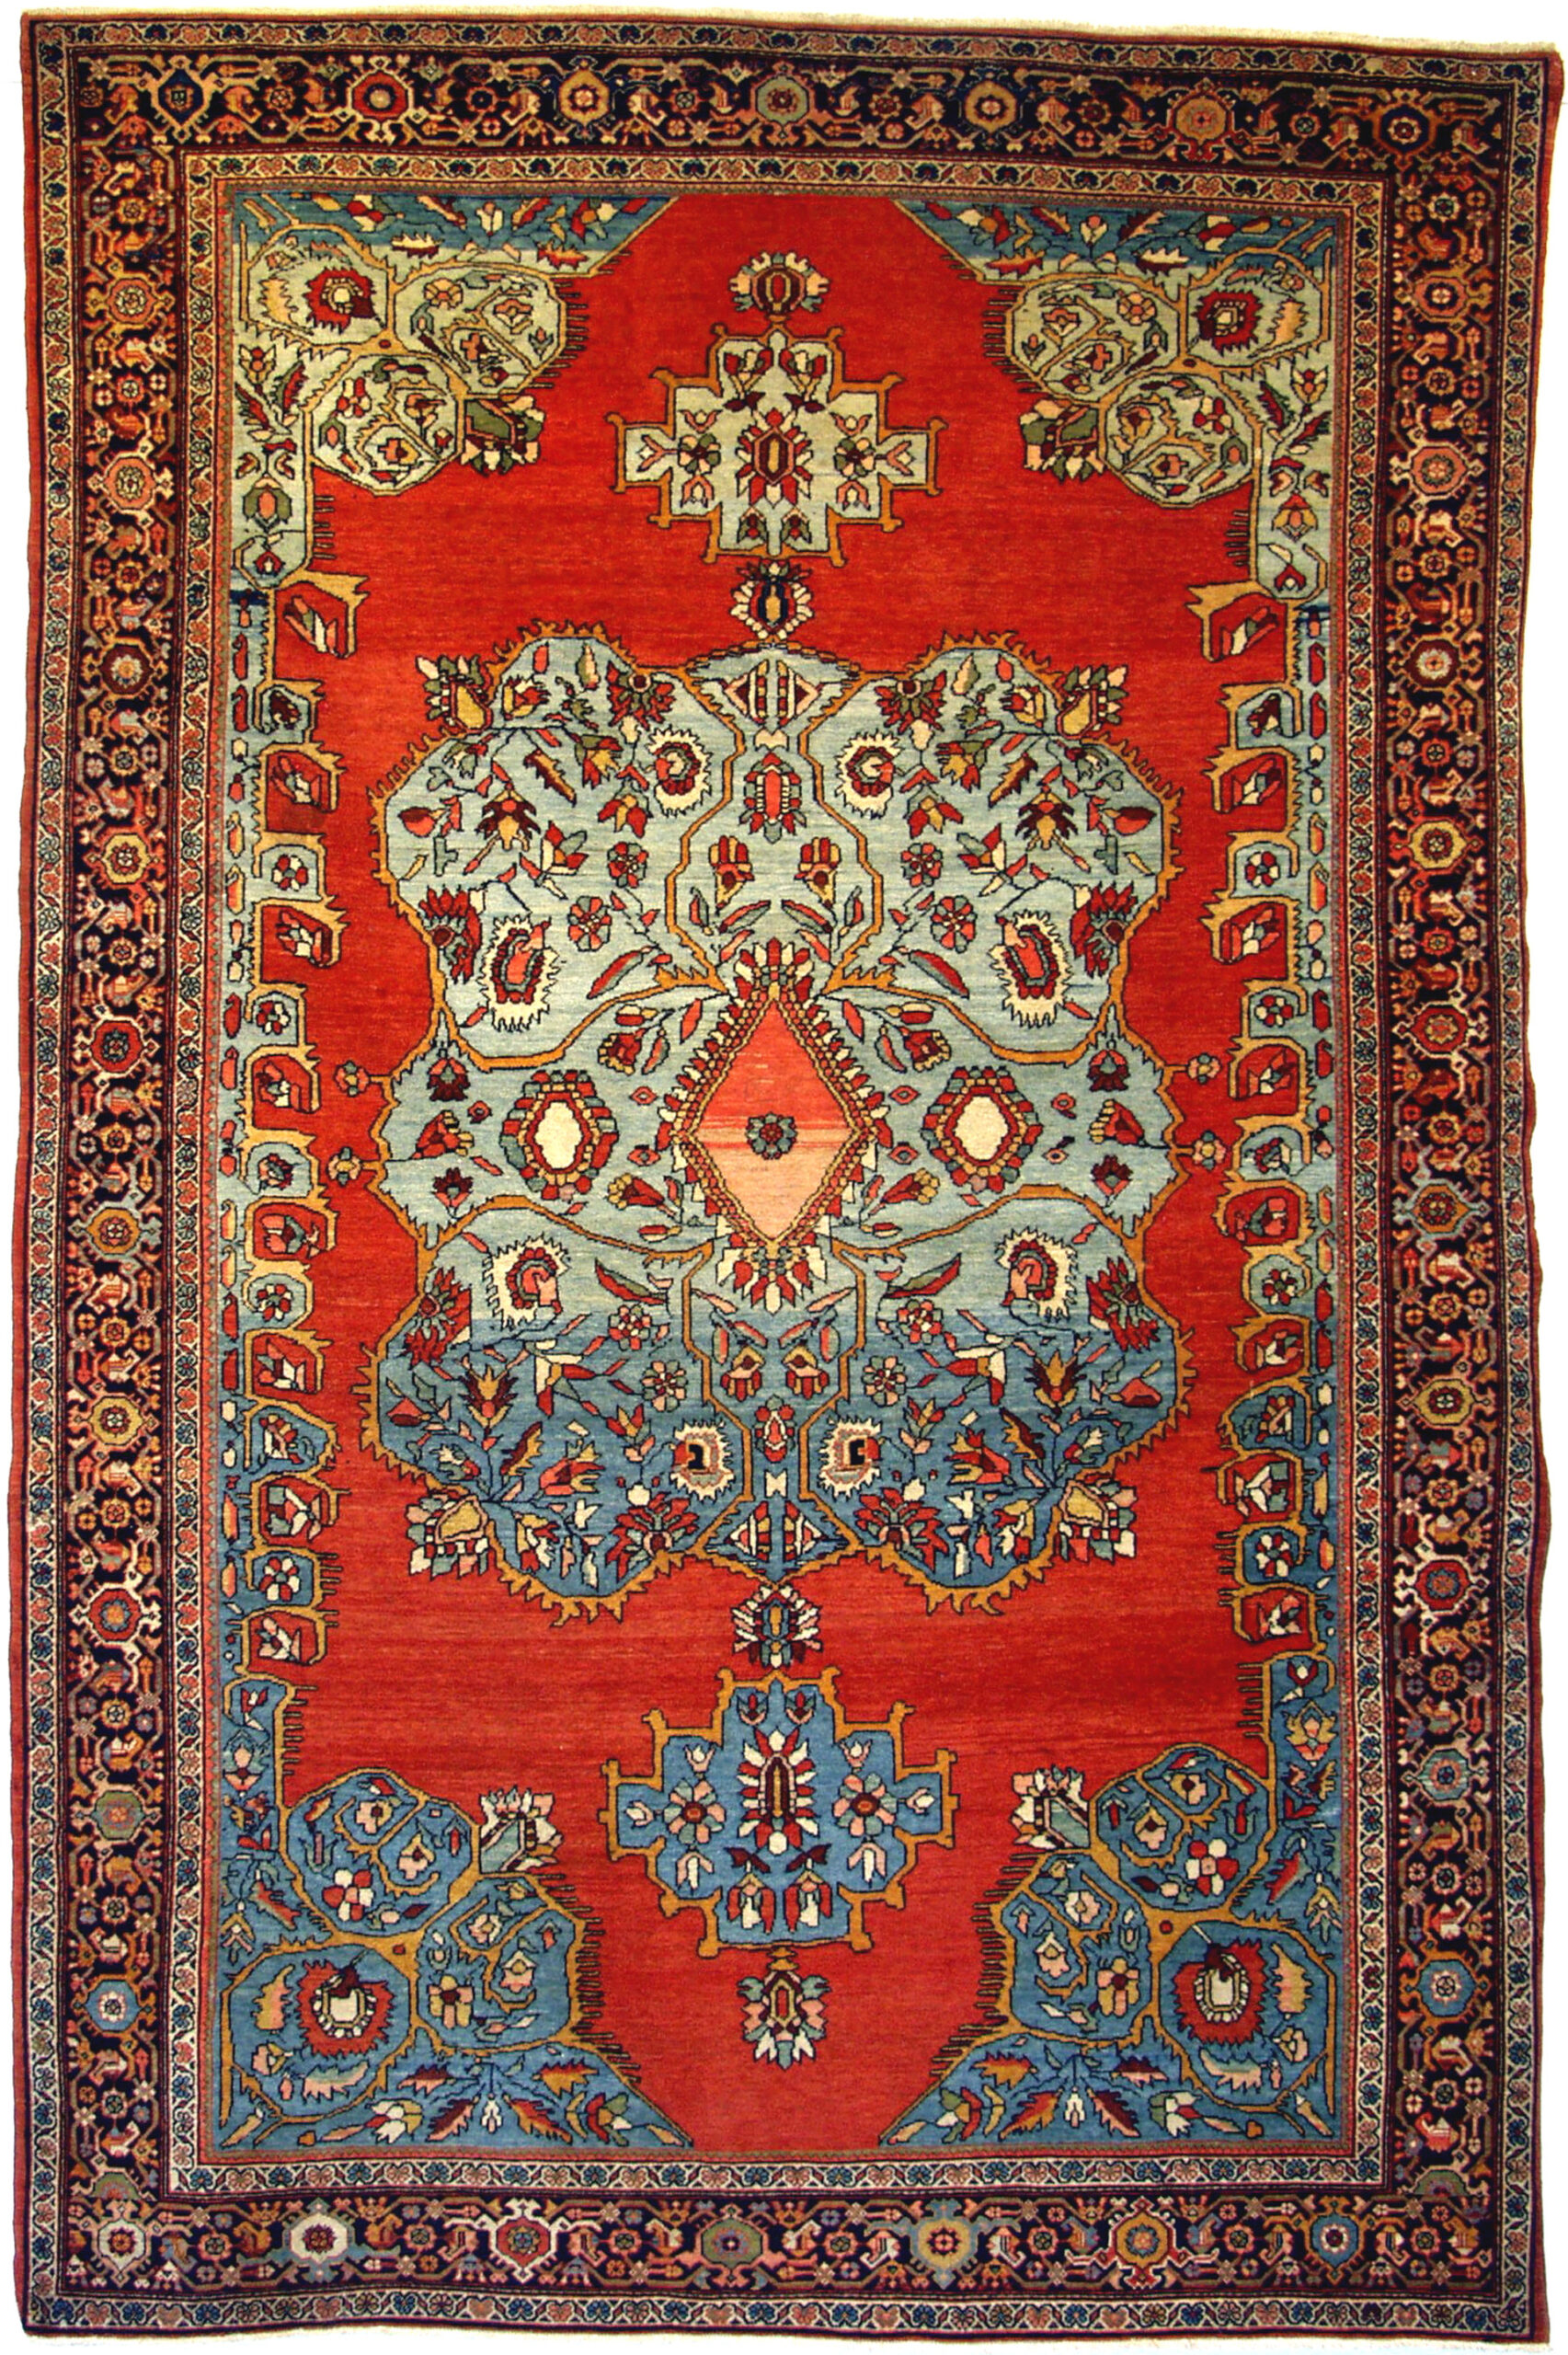 Antique Fereghan Sarouk rug with a sky blue medallion on a red open field, central Persia, 4th quarter 19th century